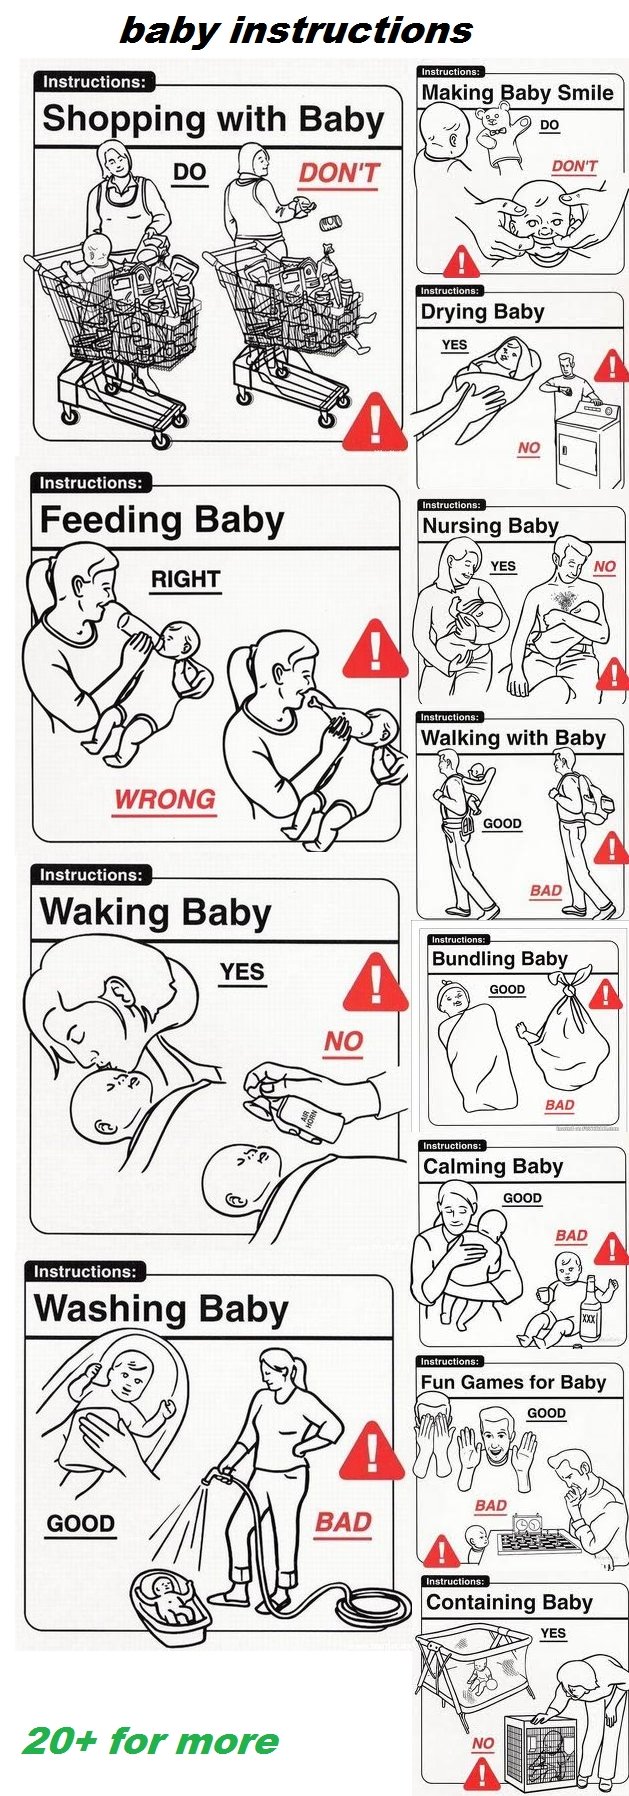 how to care for a baby. . baby instructions as run: in instructions: Shopping with Baby . miimii E [l) DON' T mta Feeding Baby teii'; Nursing Baby instructions: